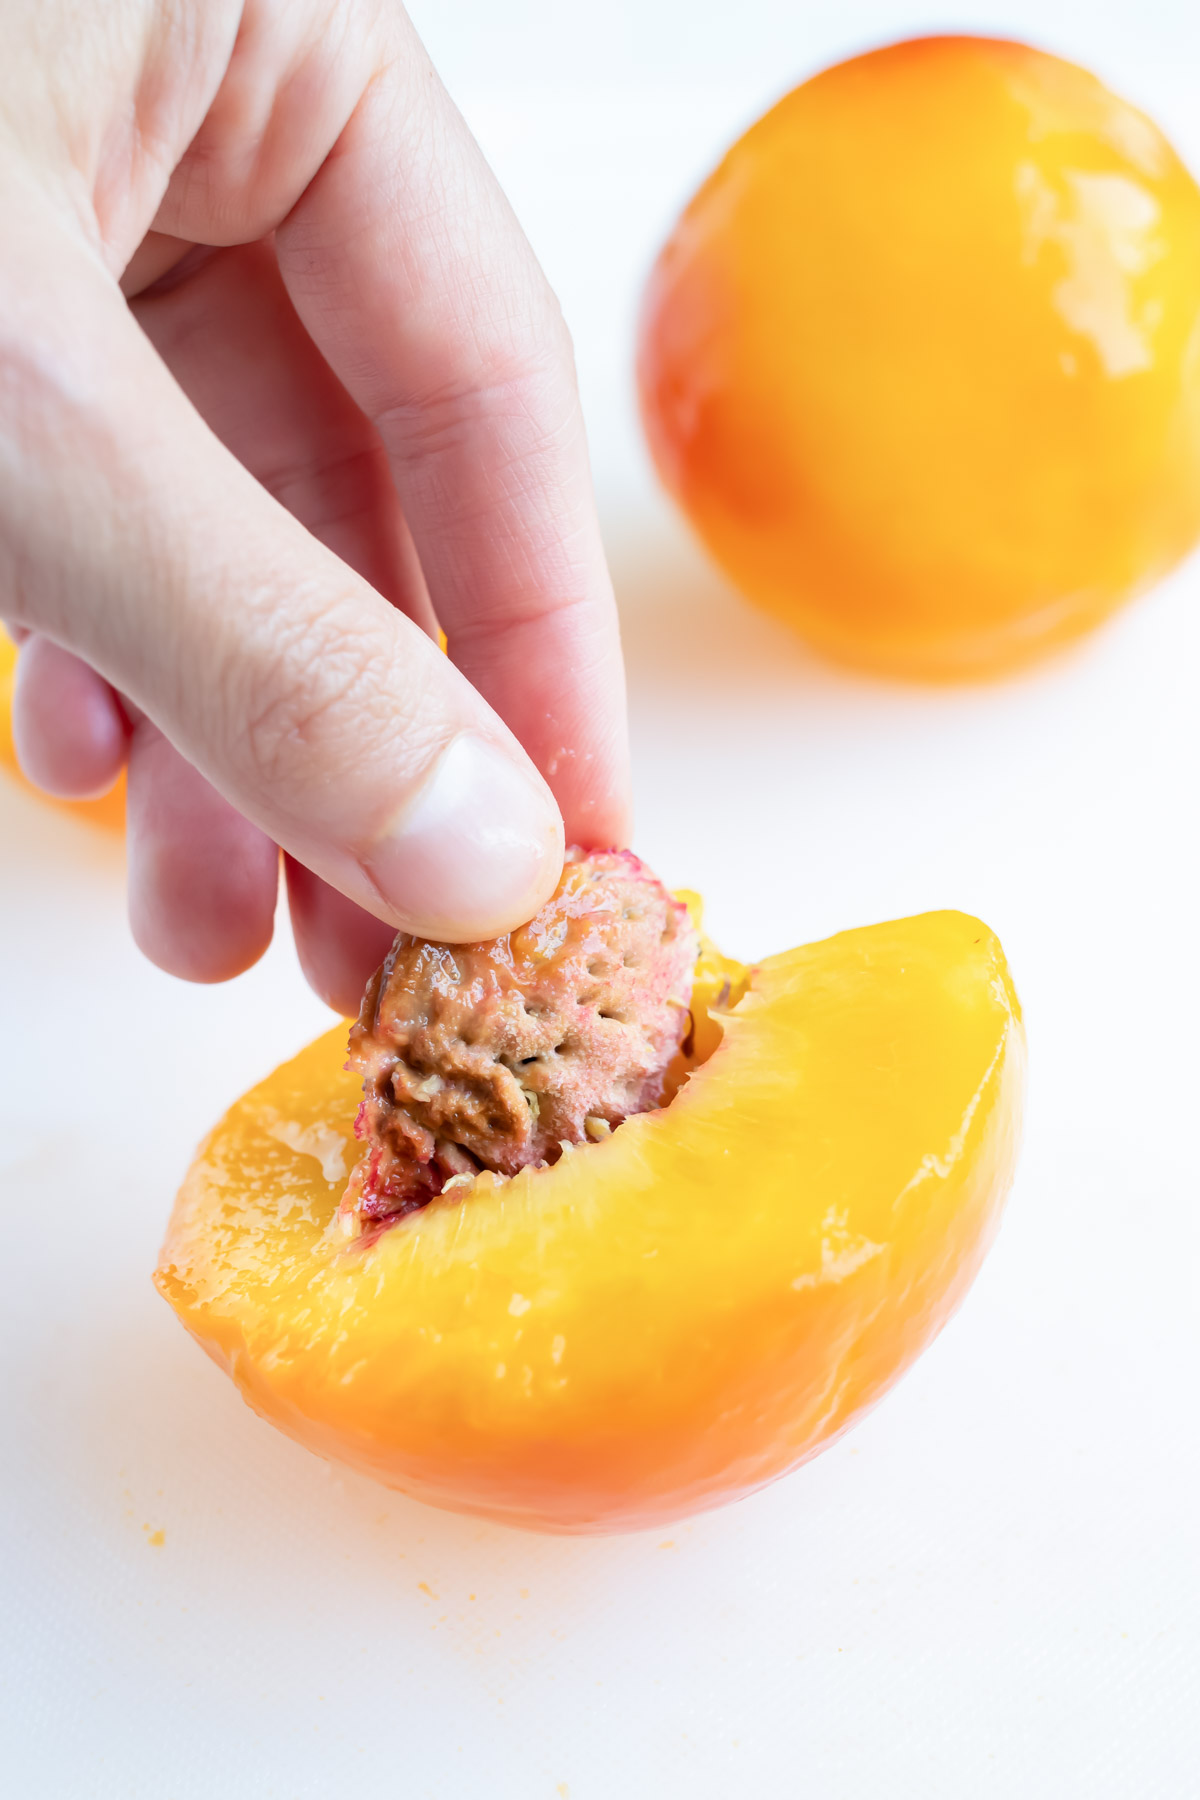 Using your fingers, remove the pit from one side of the peeled peach.